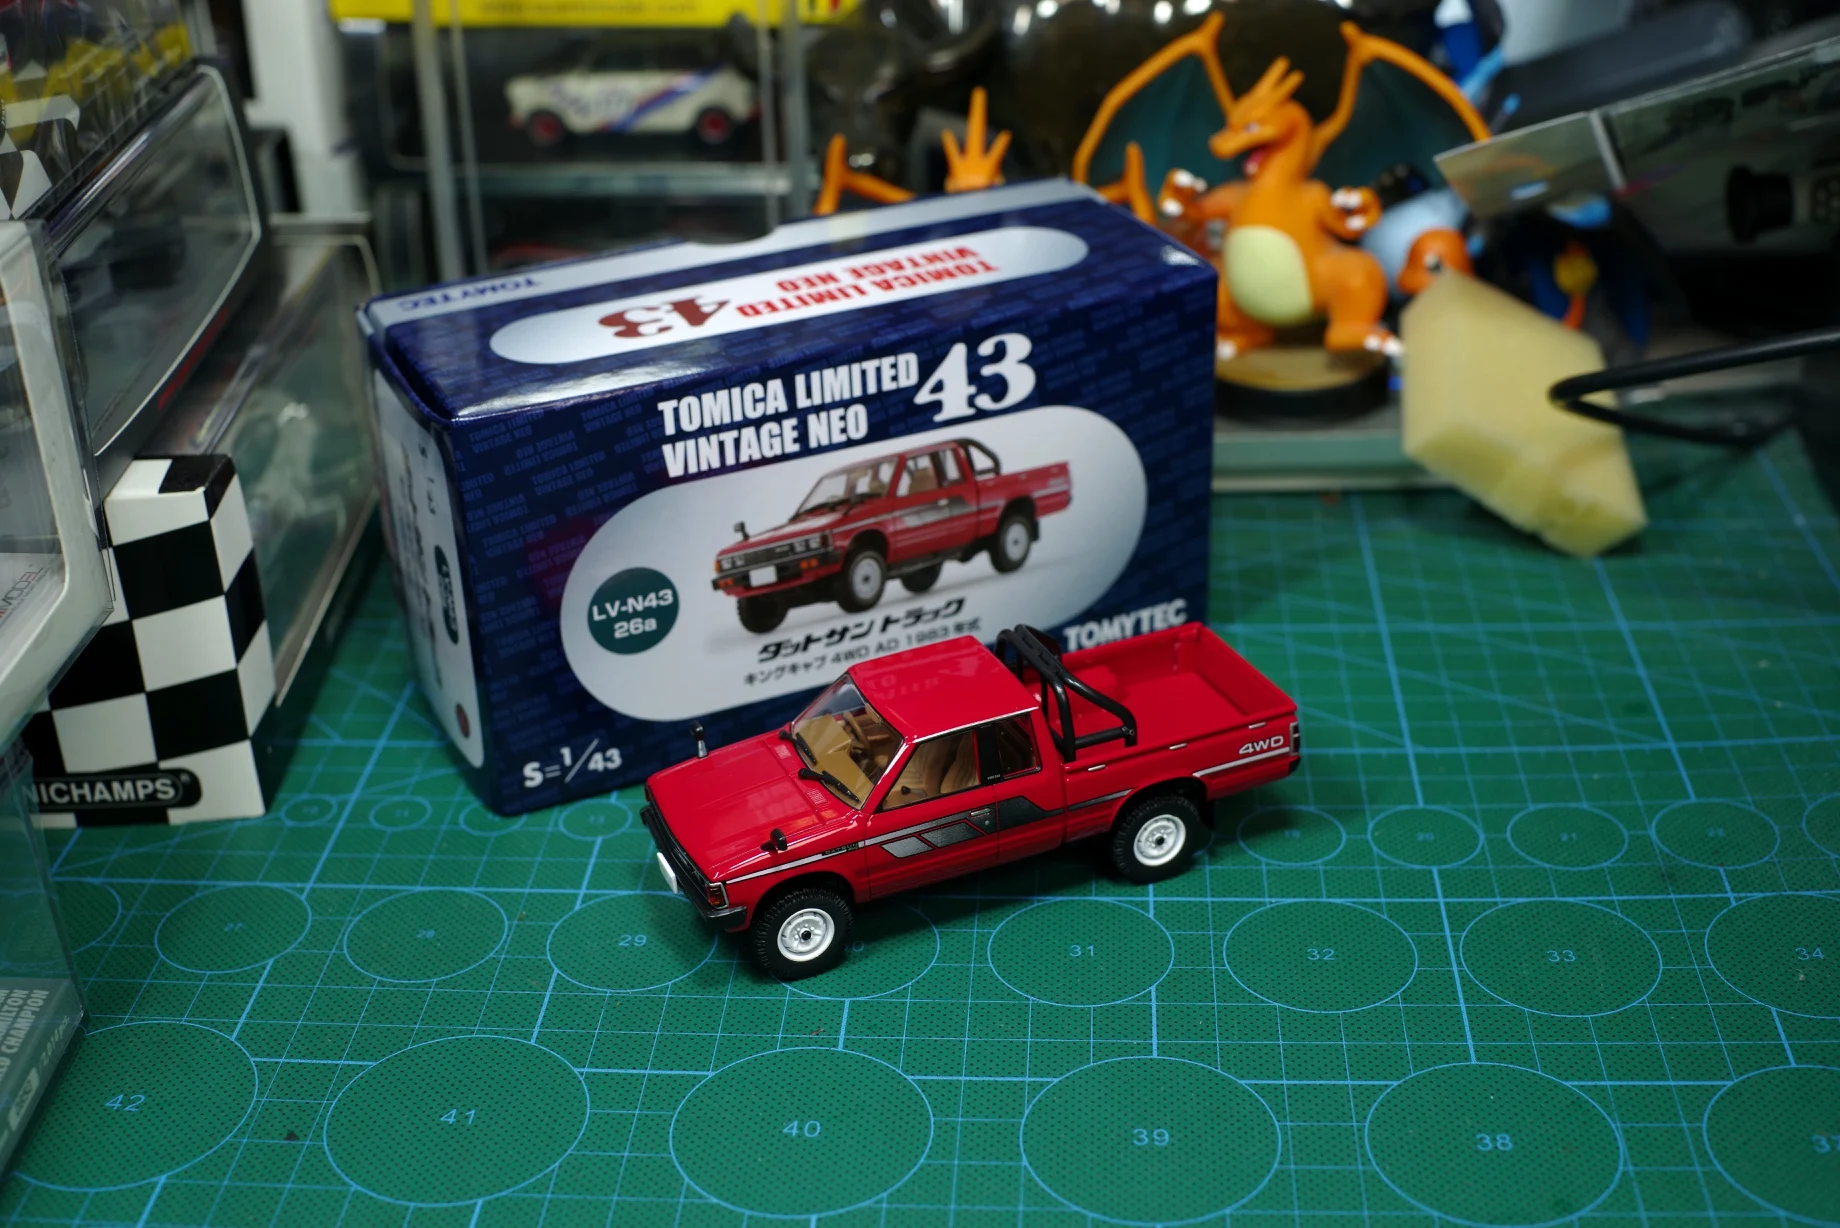 

Tomica tomytec ventage neo 1/43 TLV-NEO Datsun King cab 4WD Collect die casting alloy car models